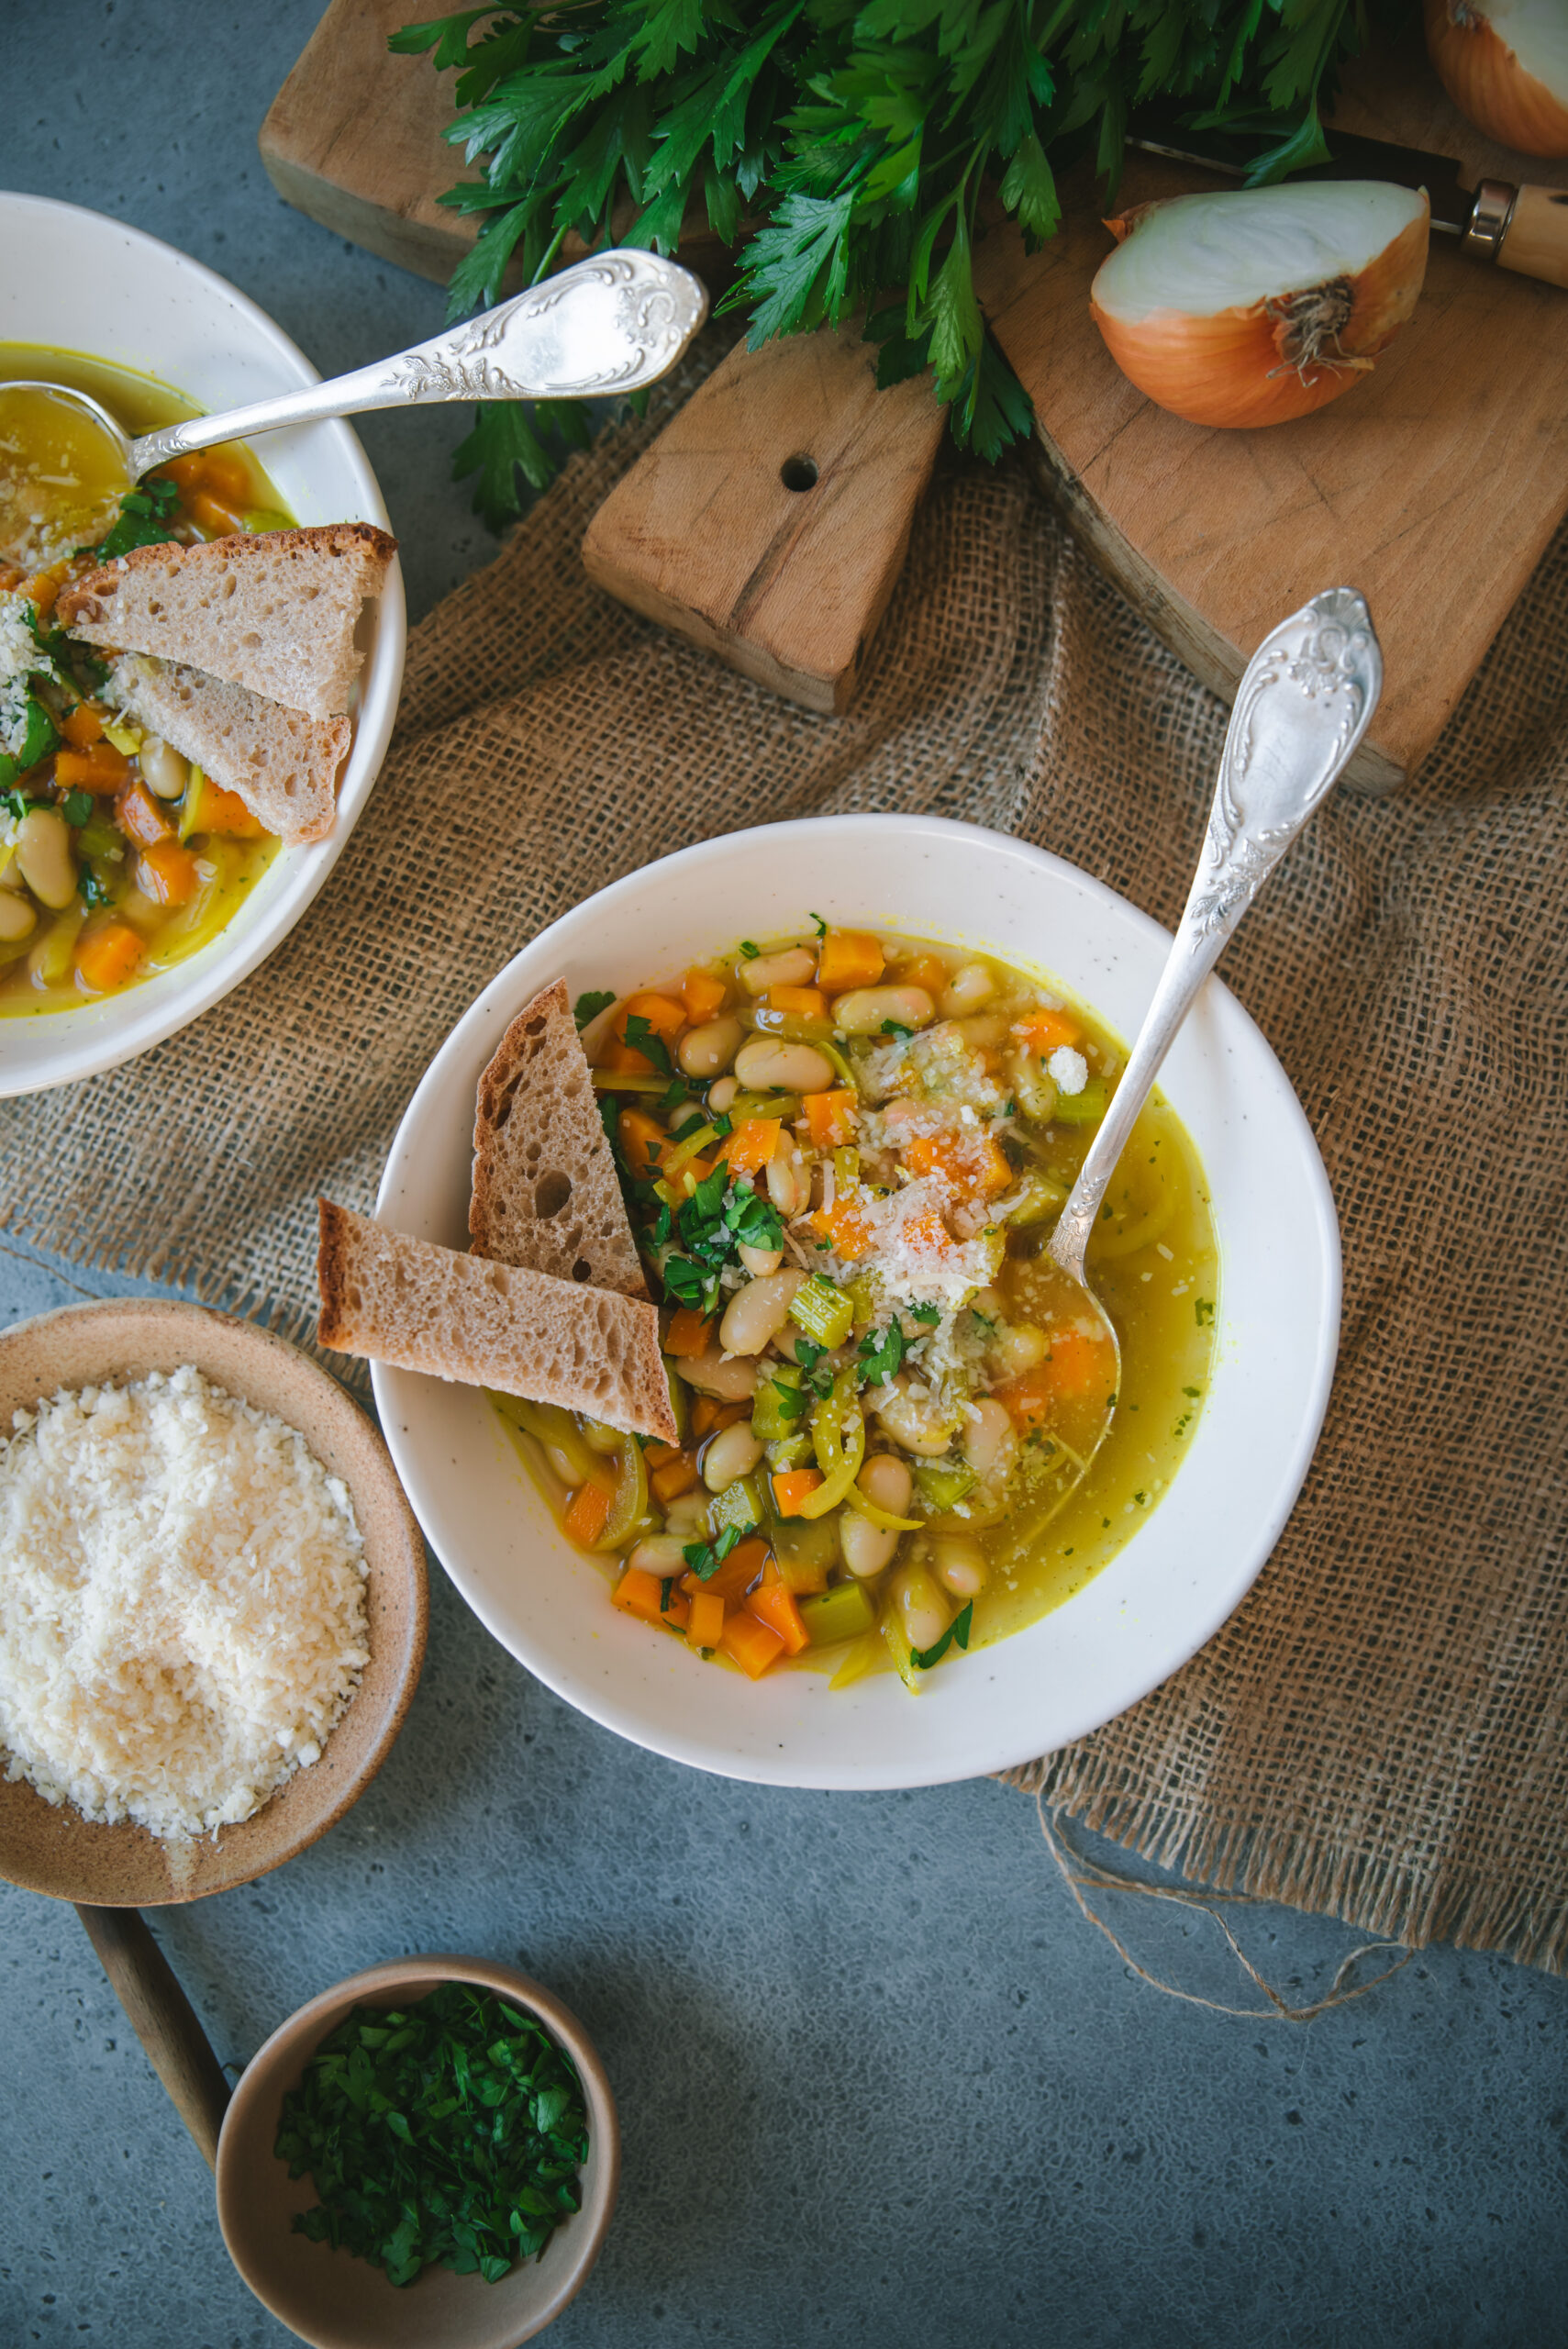 White Bean and Vegetable Soup Recipe